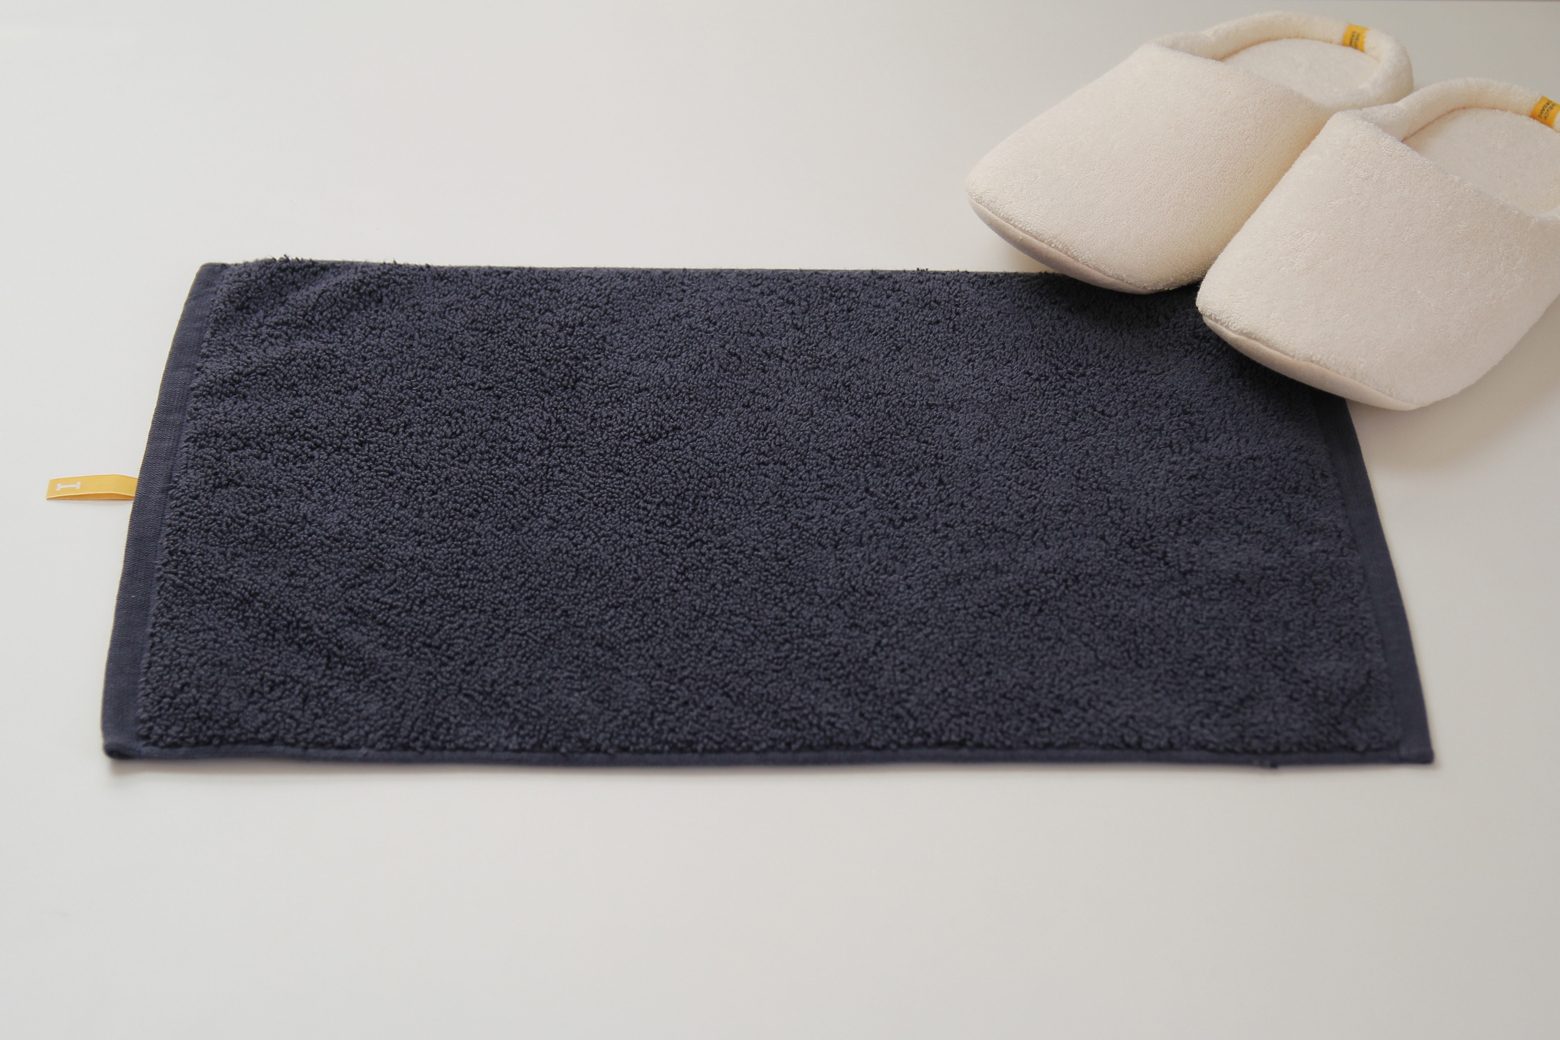 Bath mats specially designed for one person are now on sale to “make your home washroom look like a hotel.